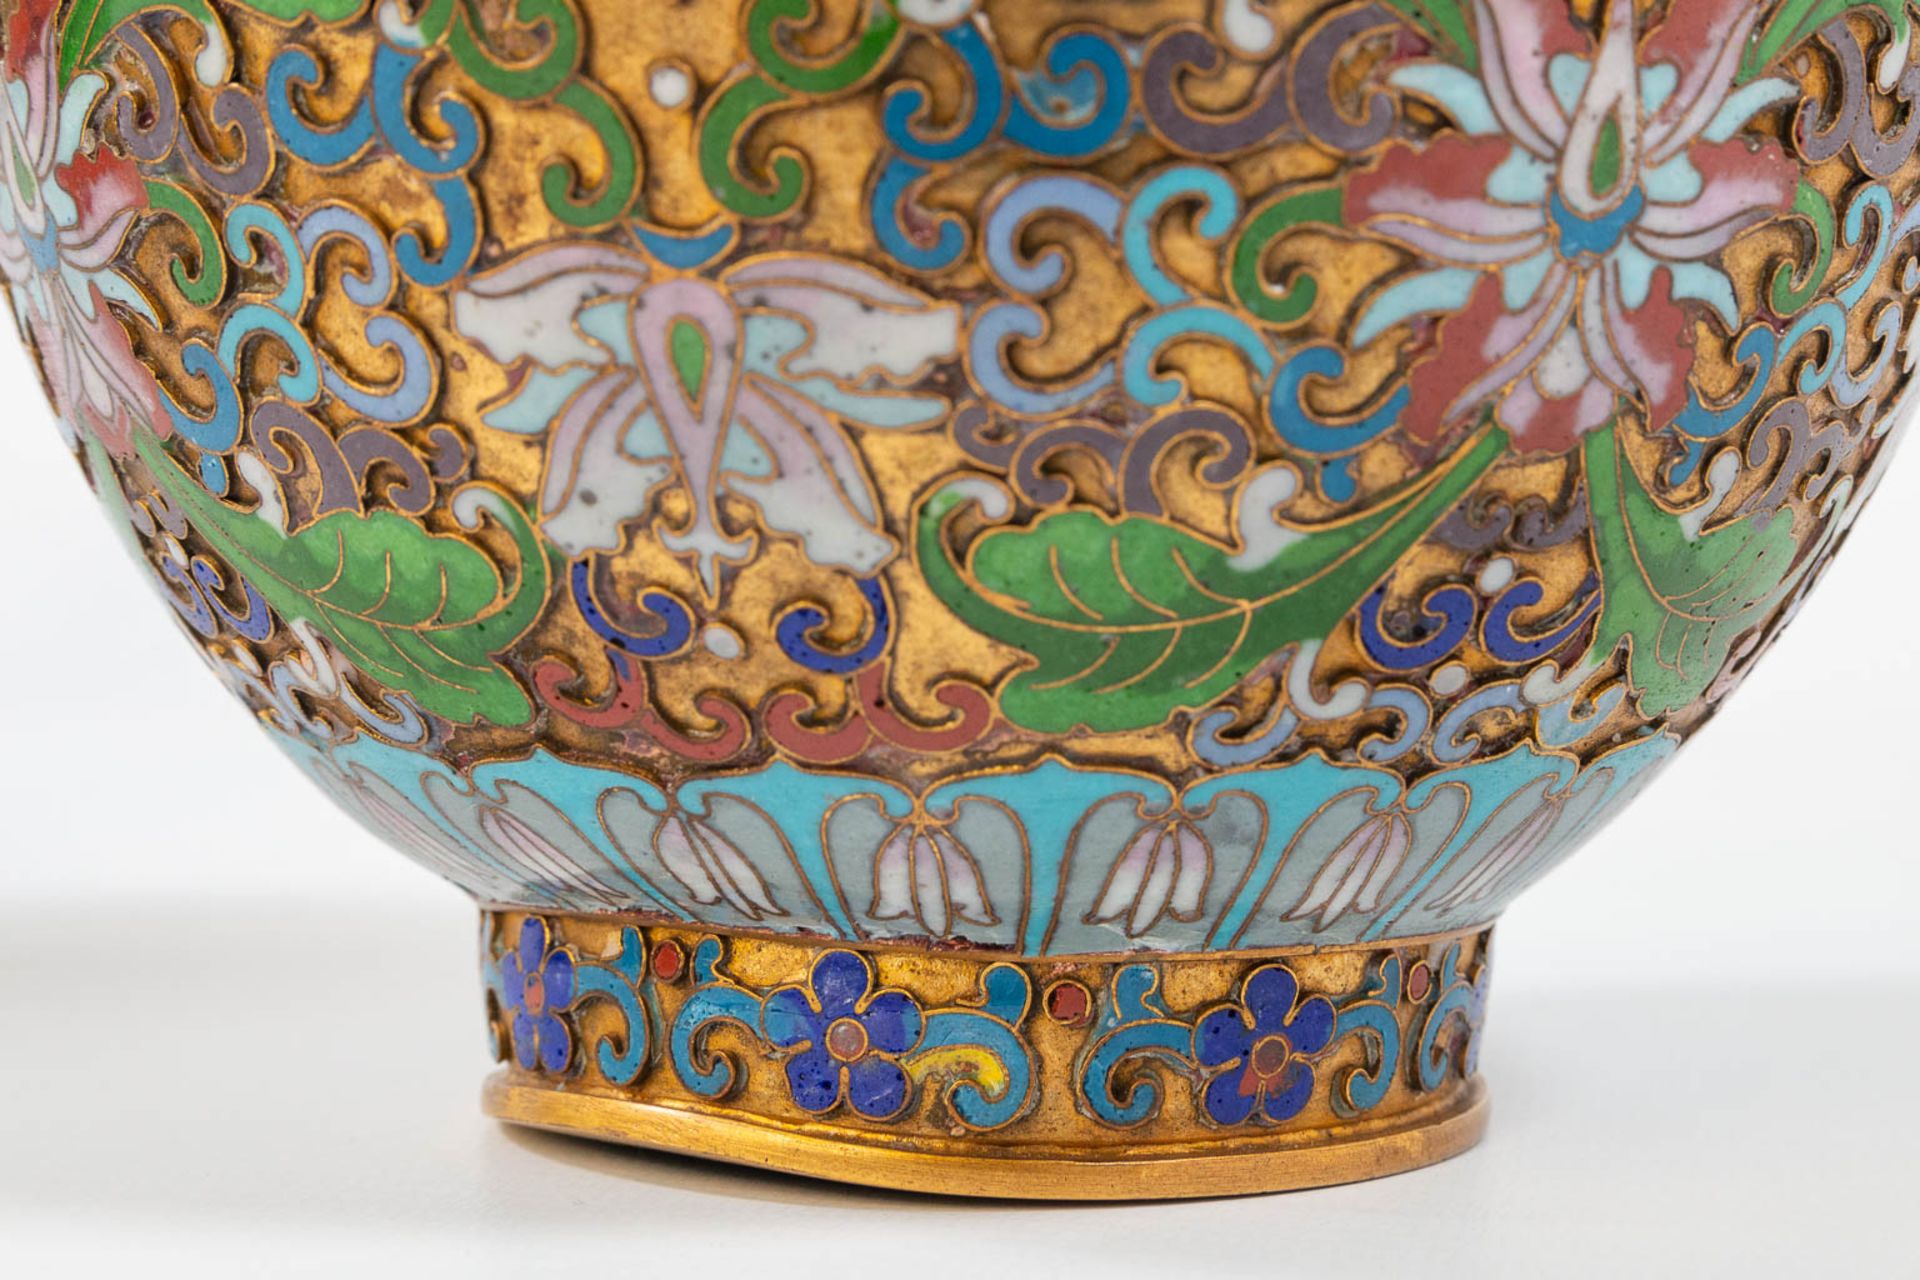 A pair of openworked Cloisonné vases, made of Bronze and enamel. - Image 16 of 17